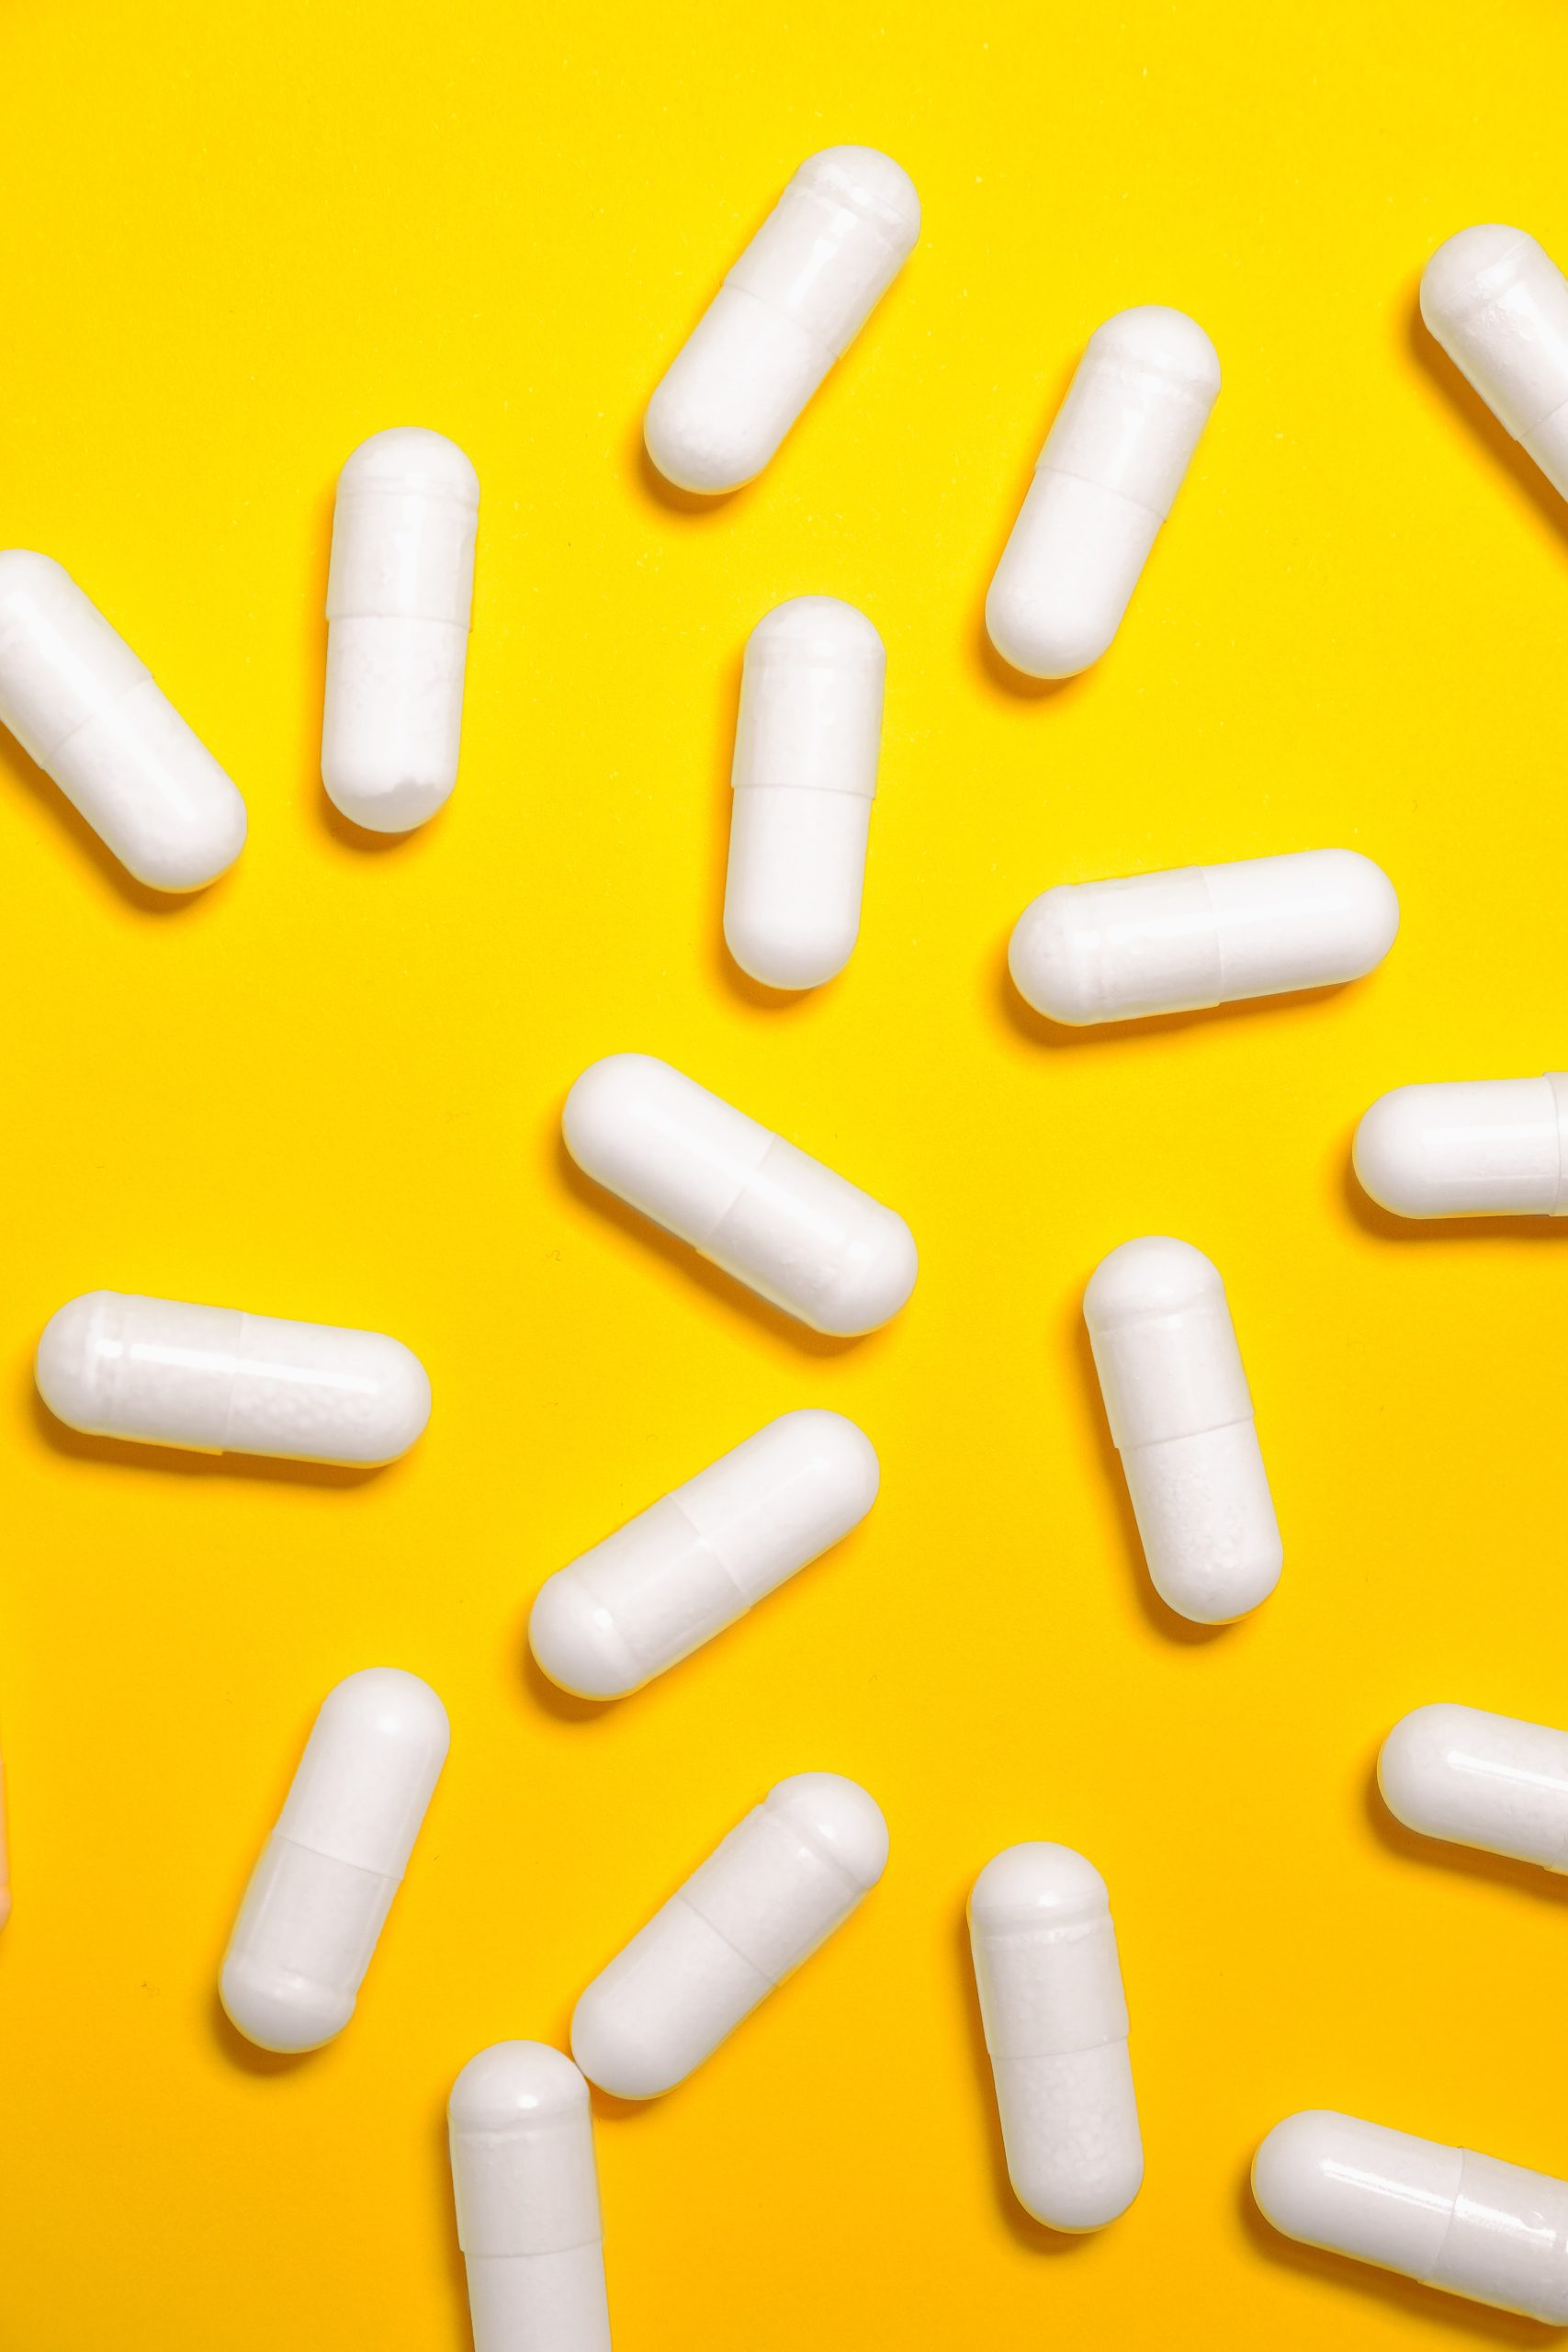 White Medication Capsules on Yellow Surface